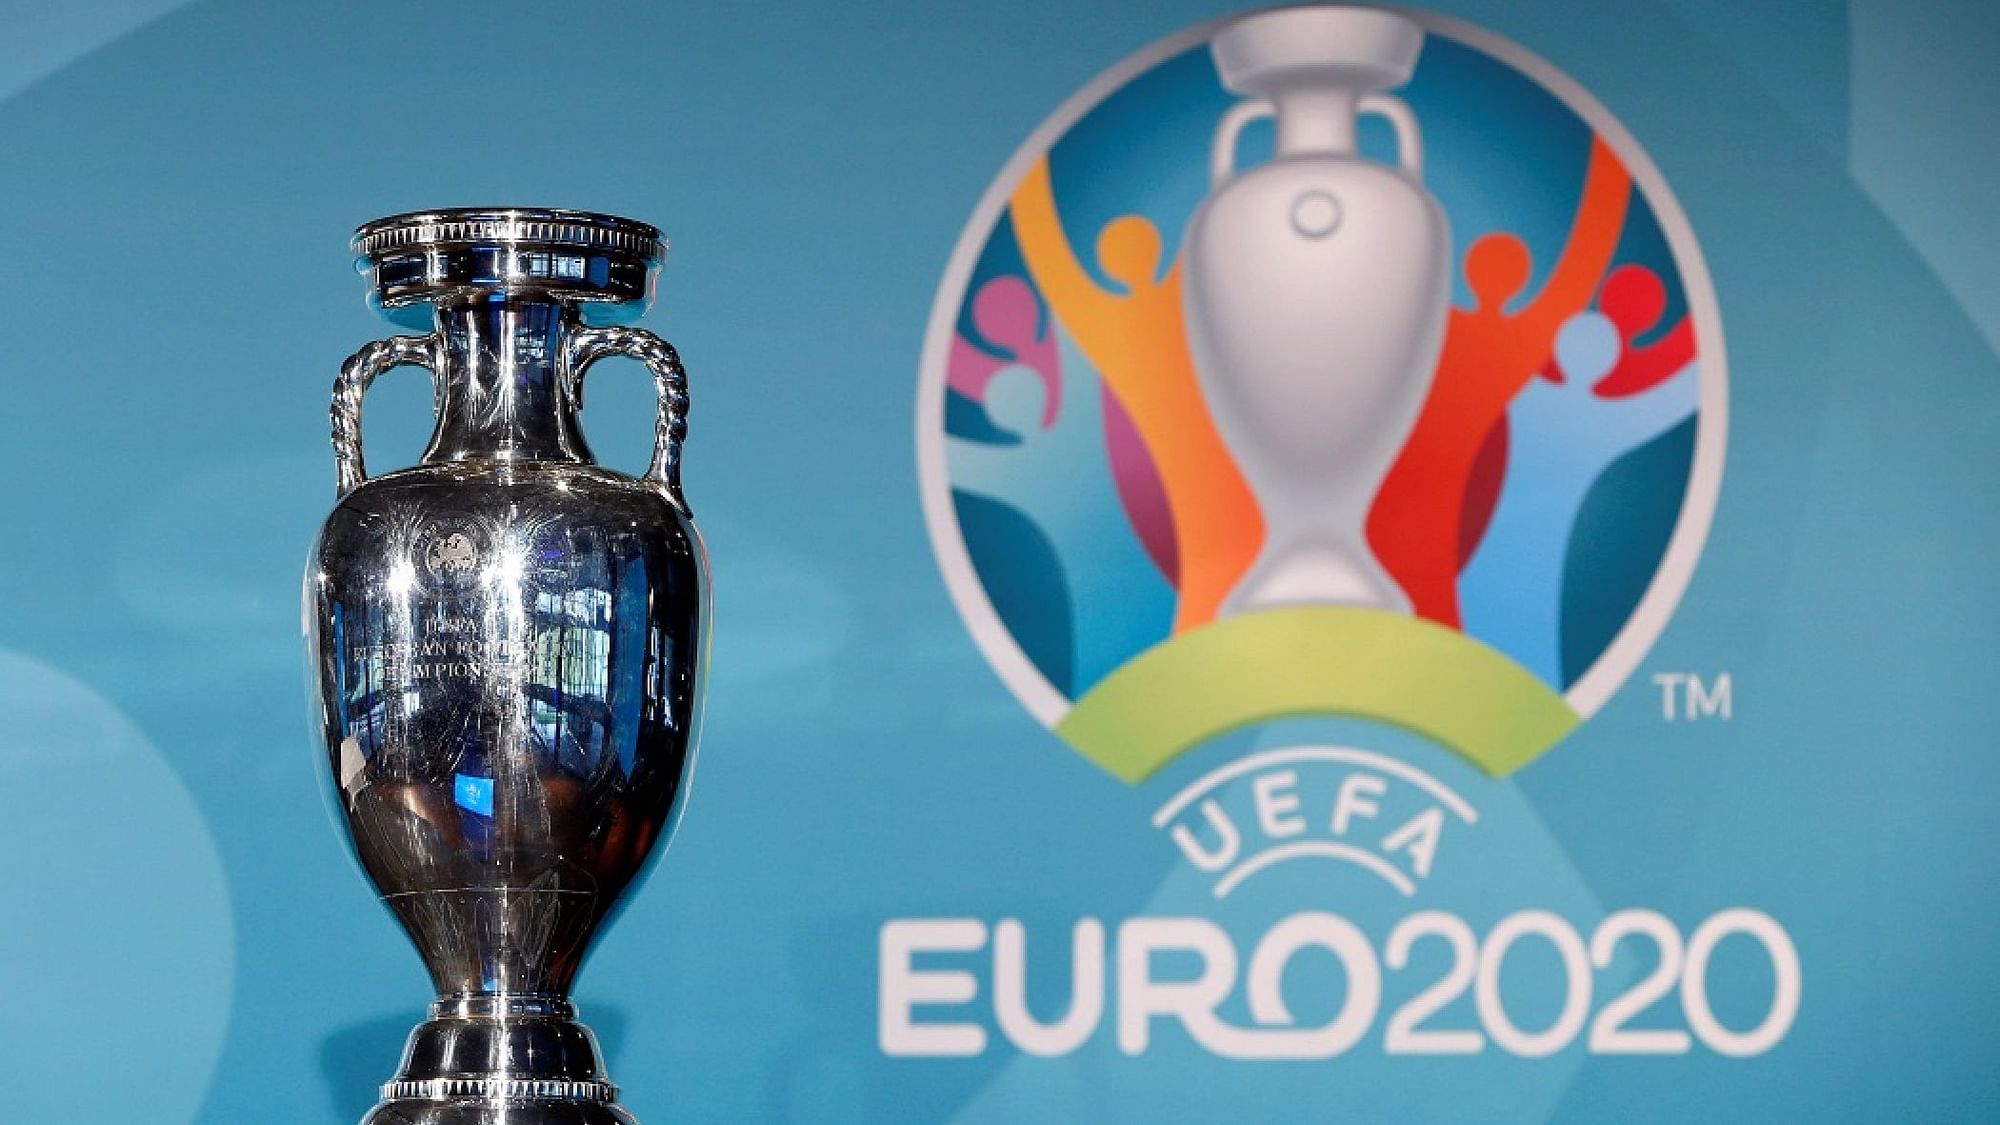 Euro 2020 is due to kick off in three months and the final four qualifying spots are due to be decided this month.